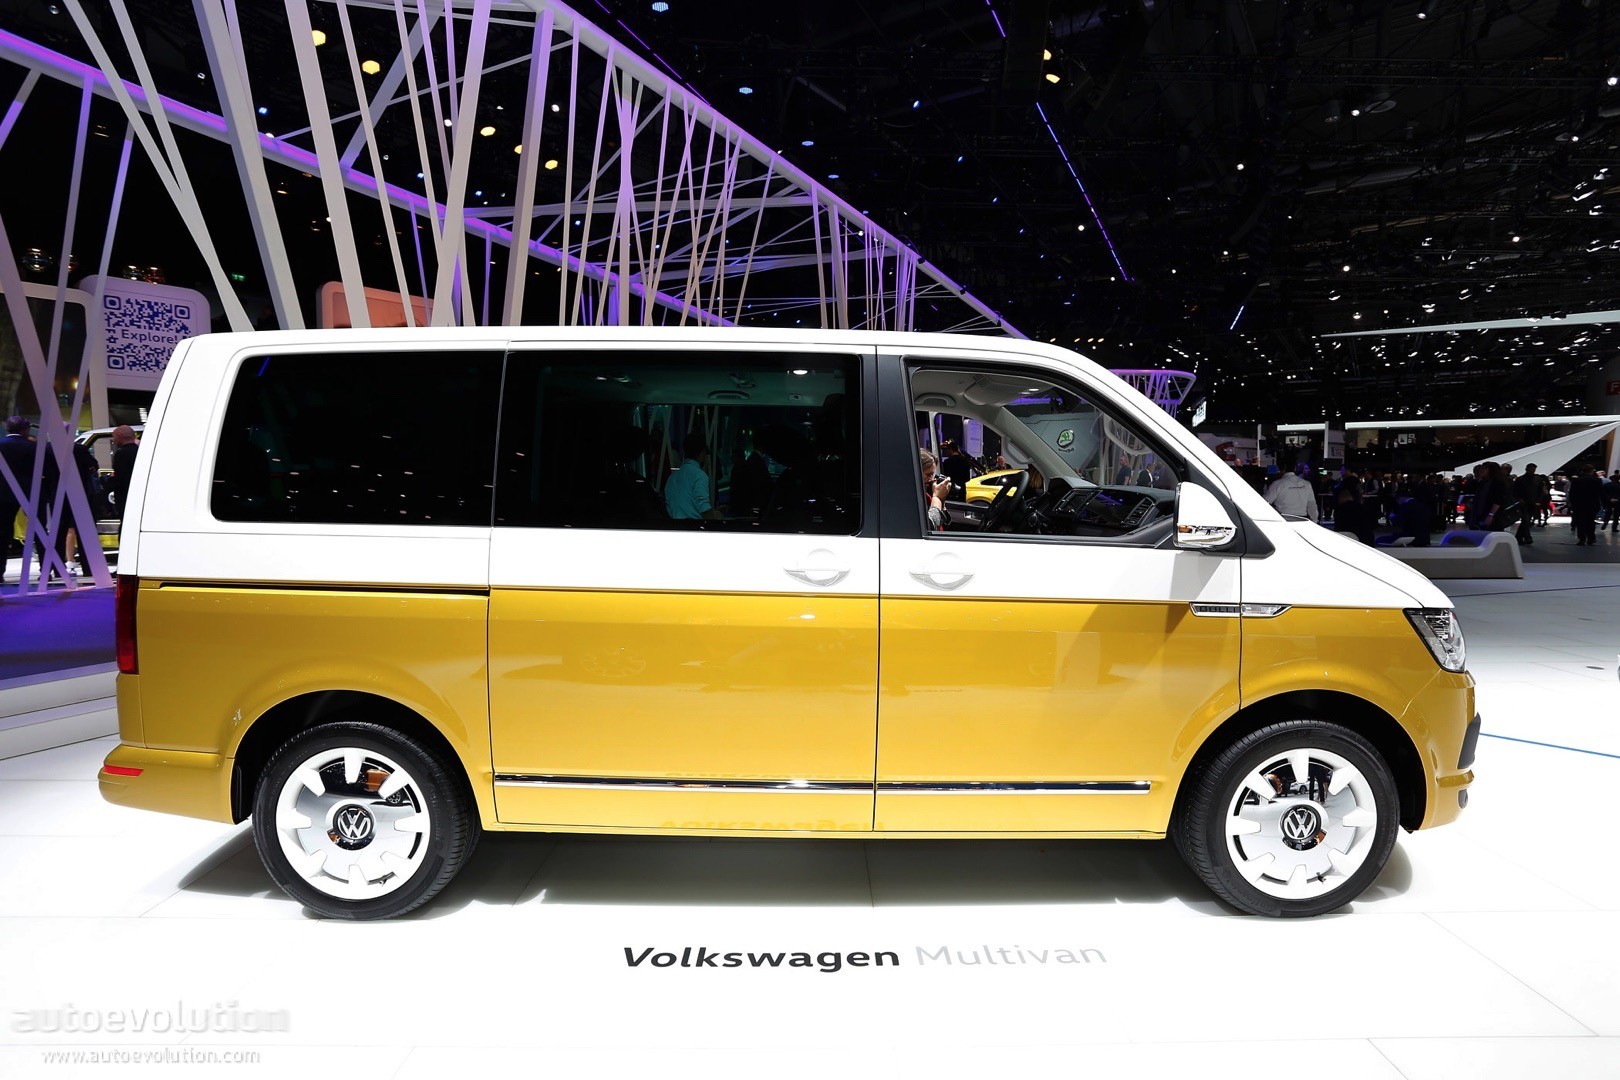 https://s1.cdn.autoevolution.com/images/news/gallery/vw-multivan-70-years-of-the-bulli-special-edition-is-the-coolest-van-in-geneva_4.jpg